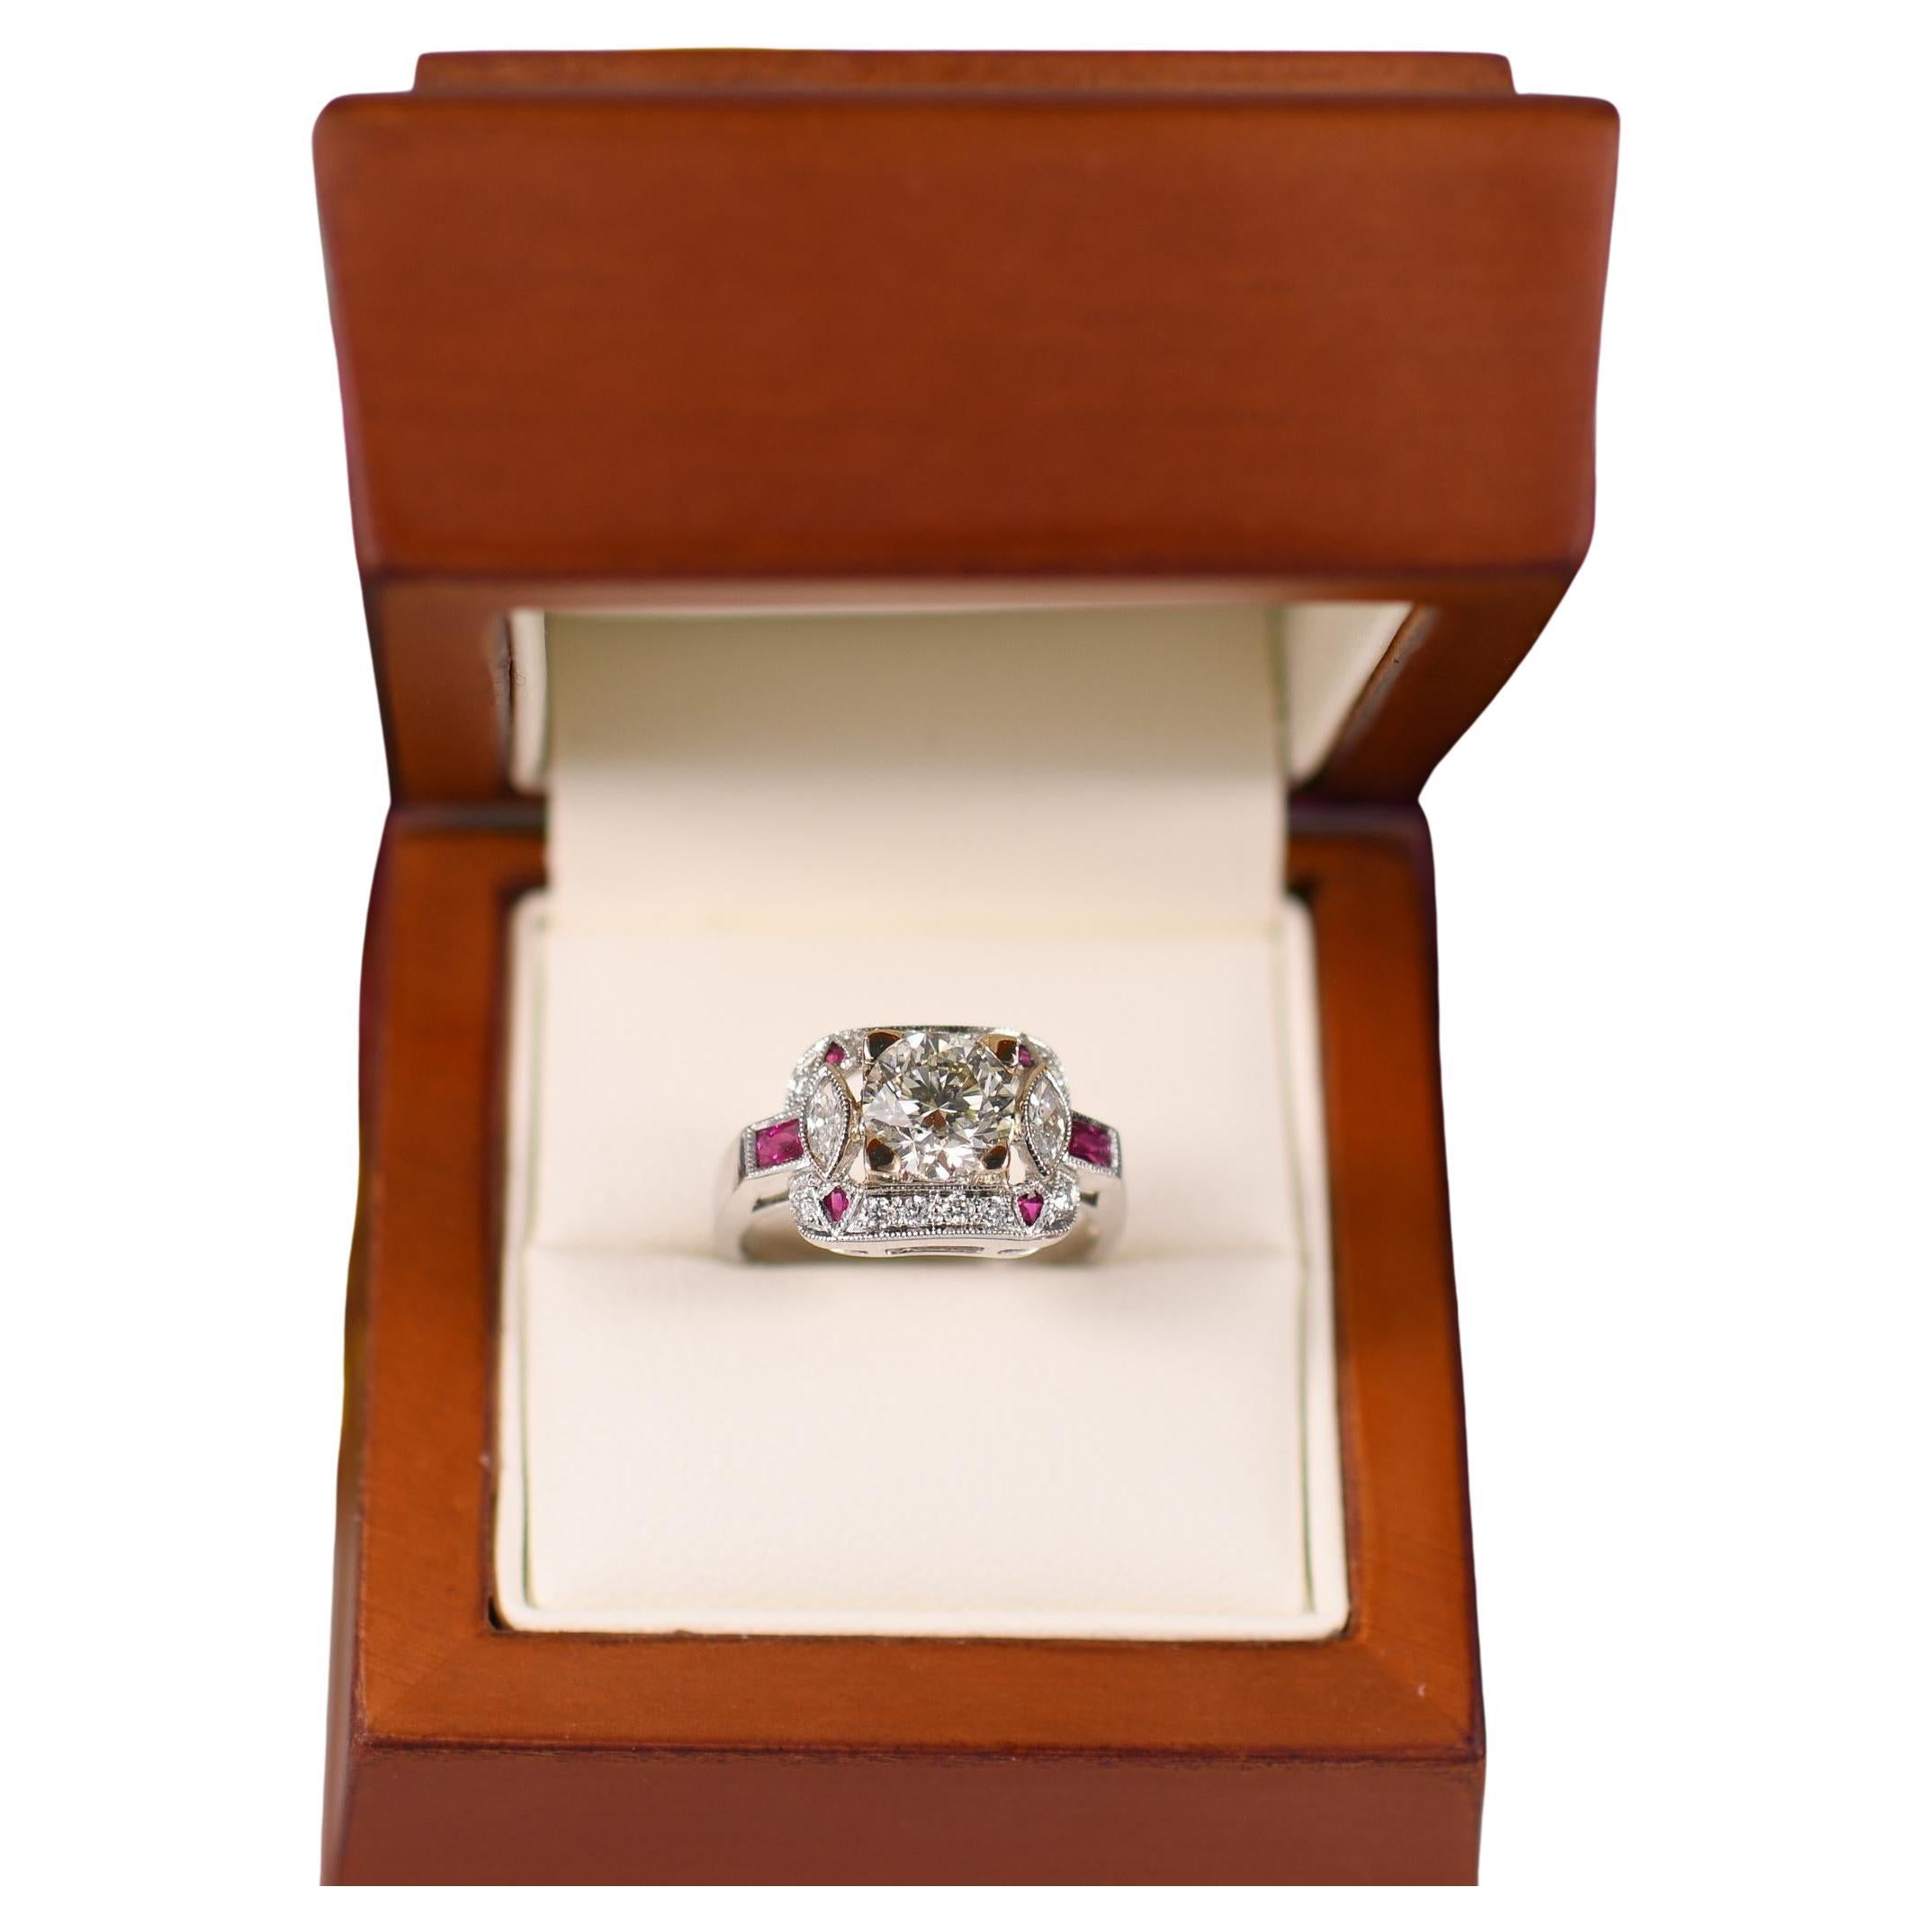 1.41ct Diamond Art Deco Inspired Engagement Ring w Ruby & Diamond accents